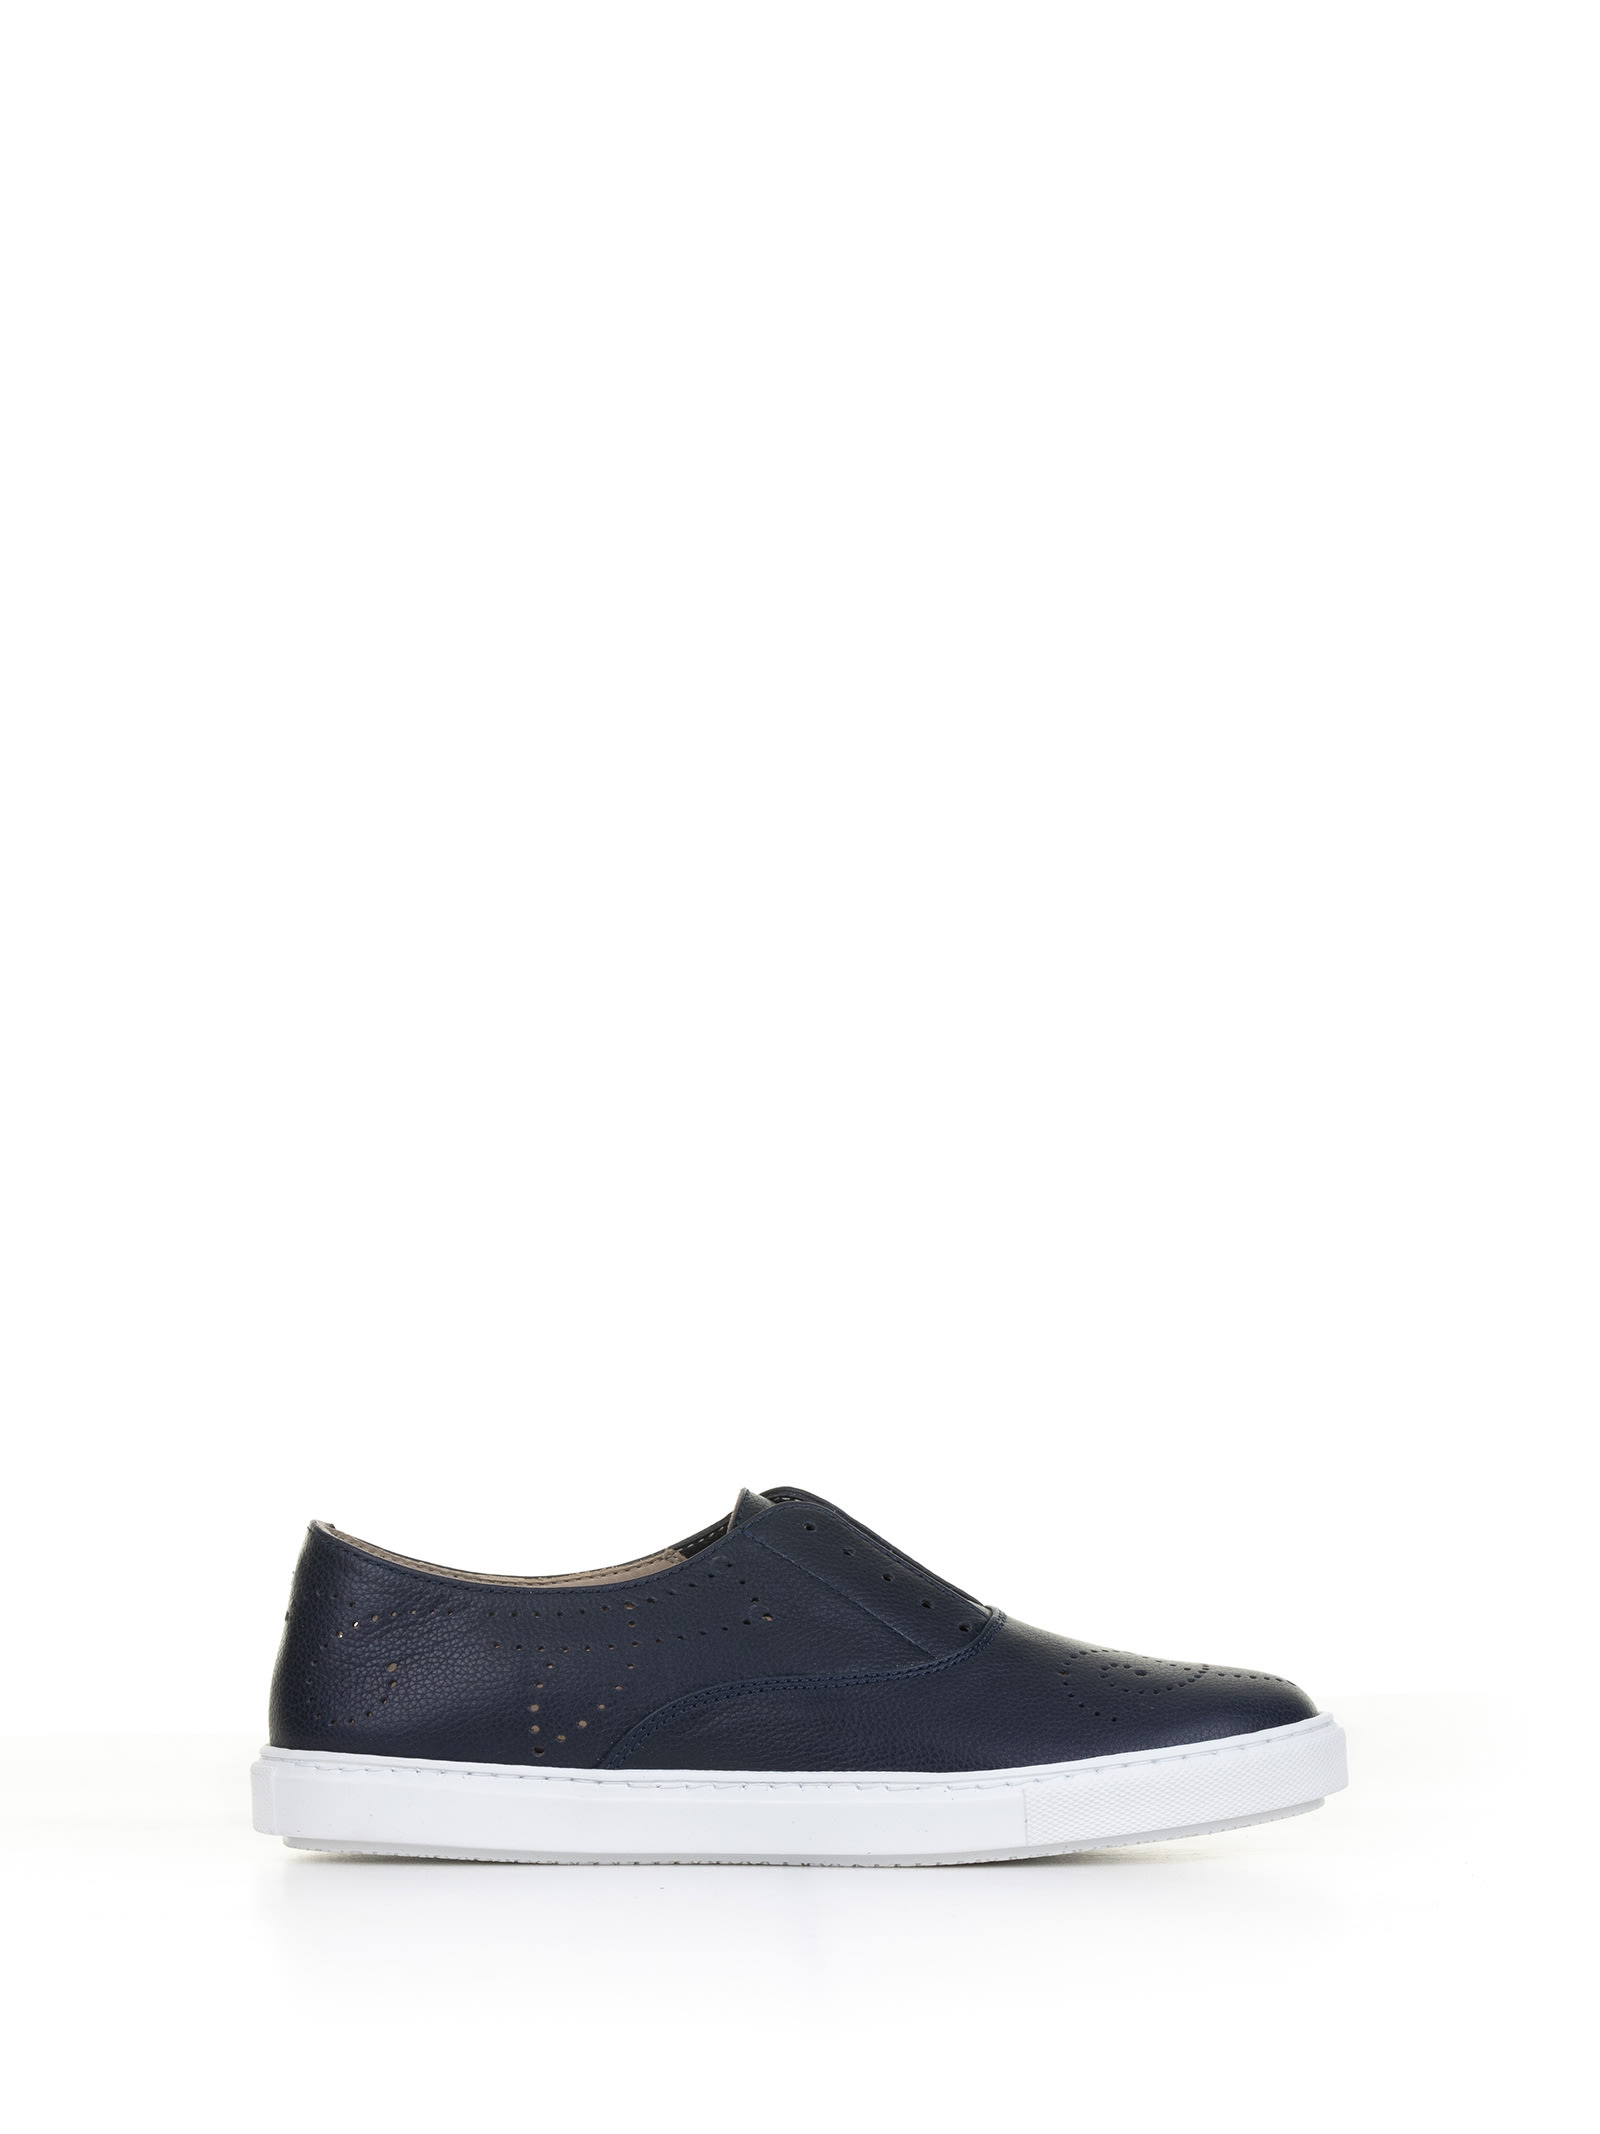 Navy Blue Leather Slip-on Sneakers